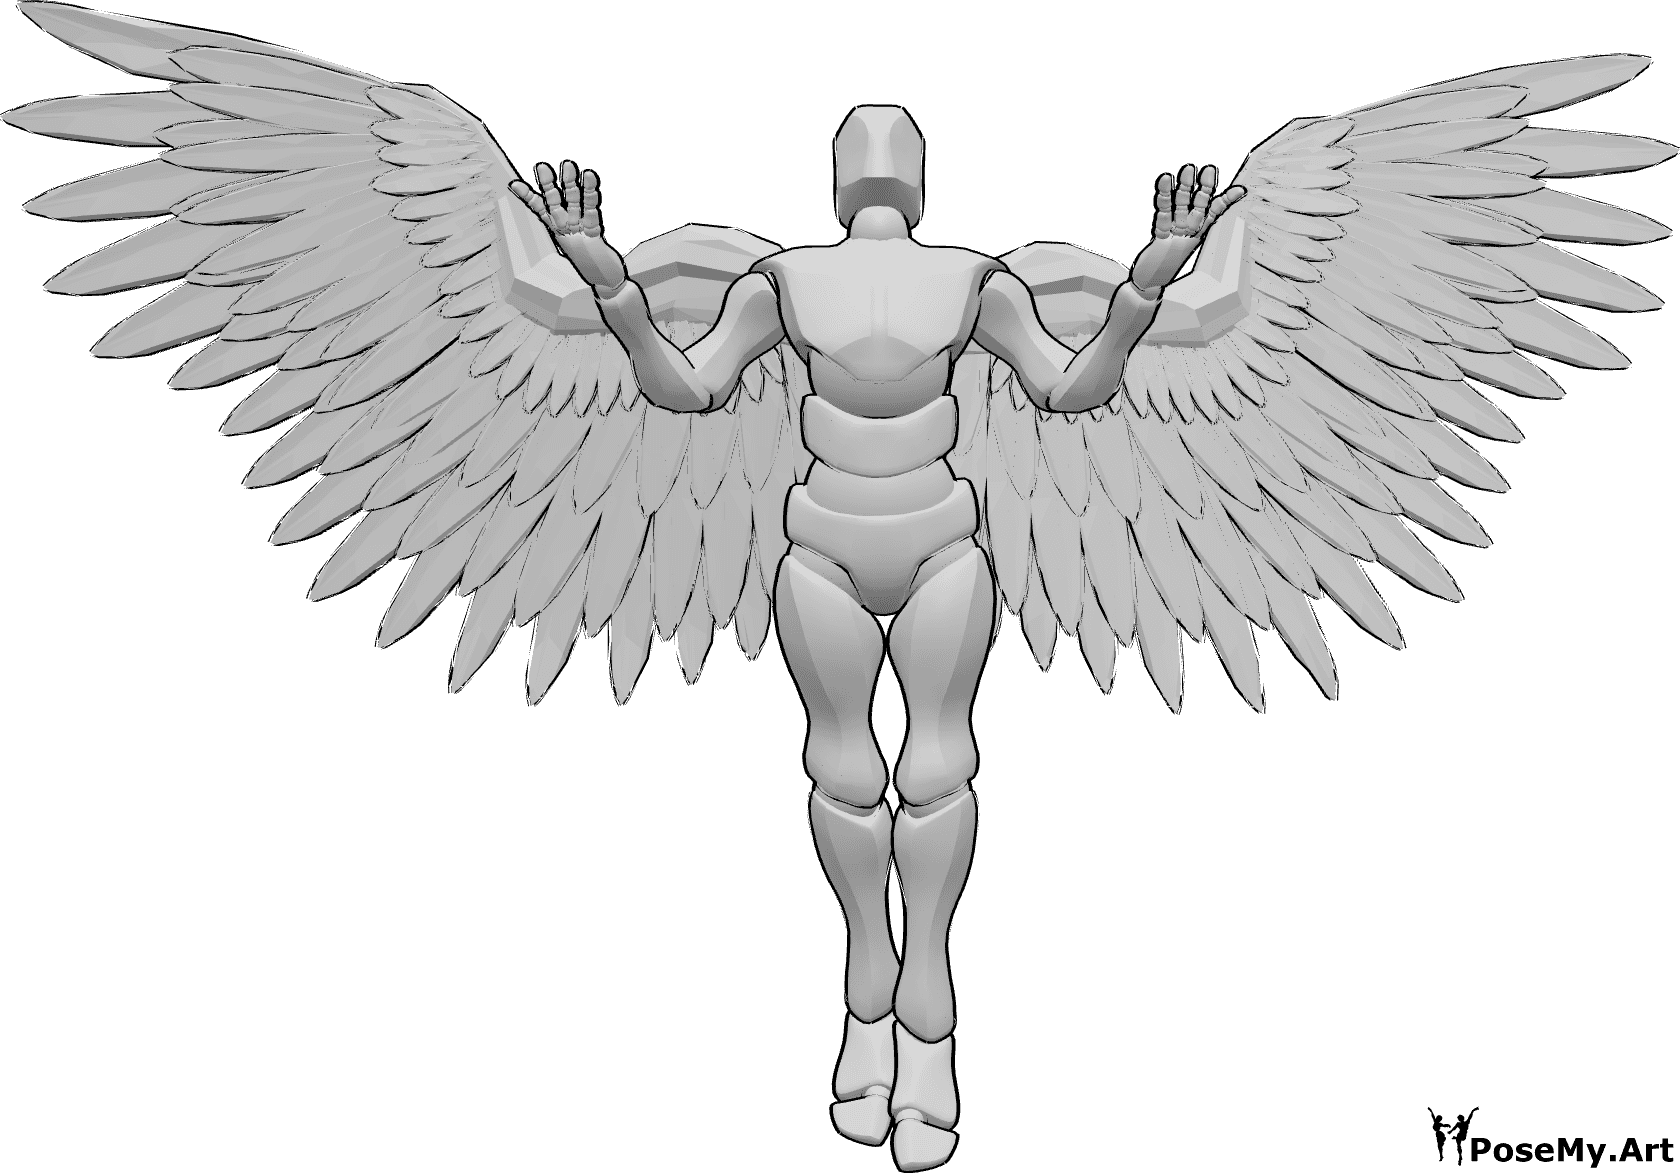 Pose Reference- Male angel wings pose - Male with angel wings is flying upwards, raising his hands and looking up